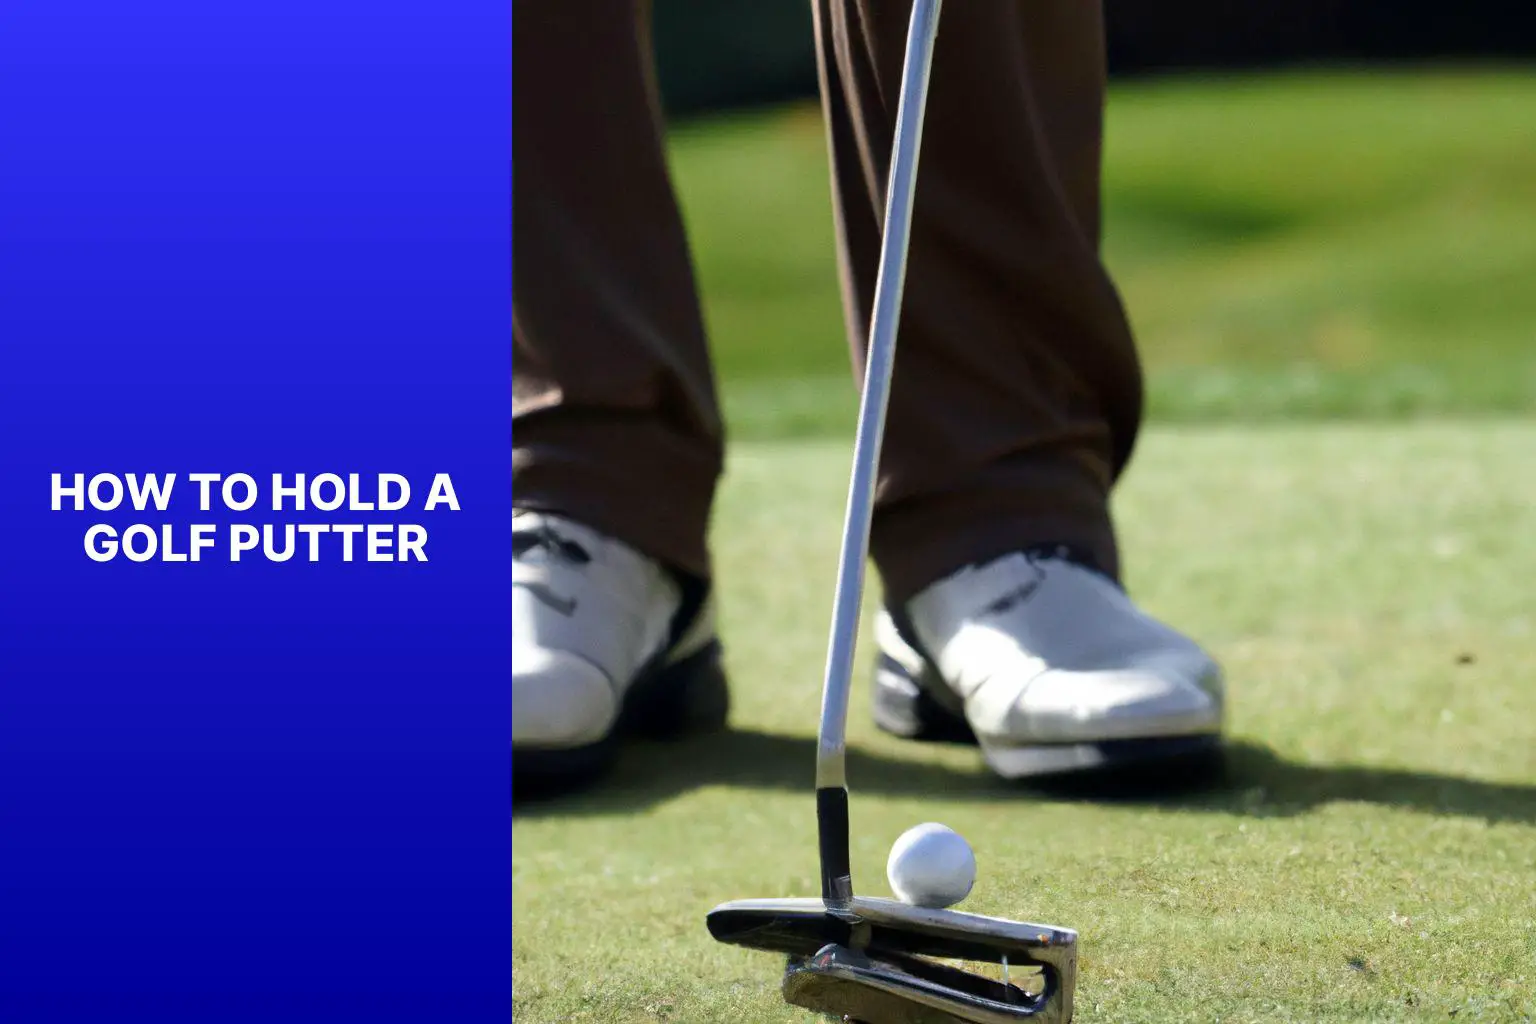 Mastering the Art of Holding a Golf Putter for Accurate Putts